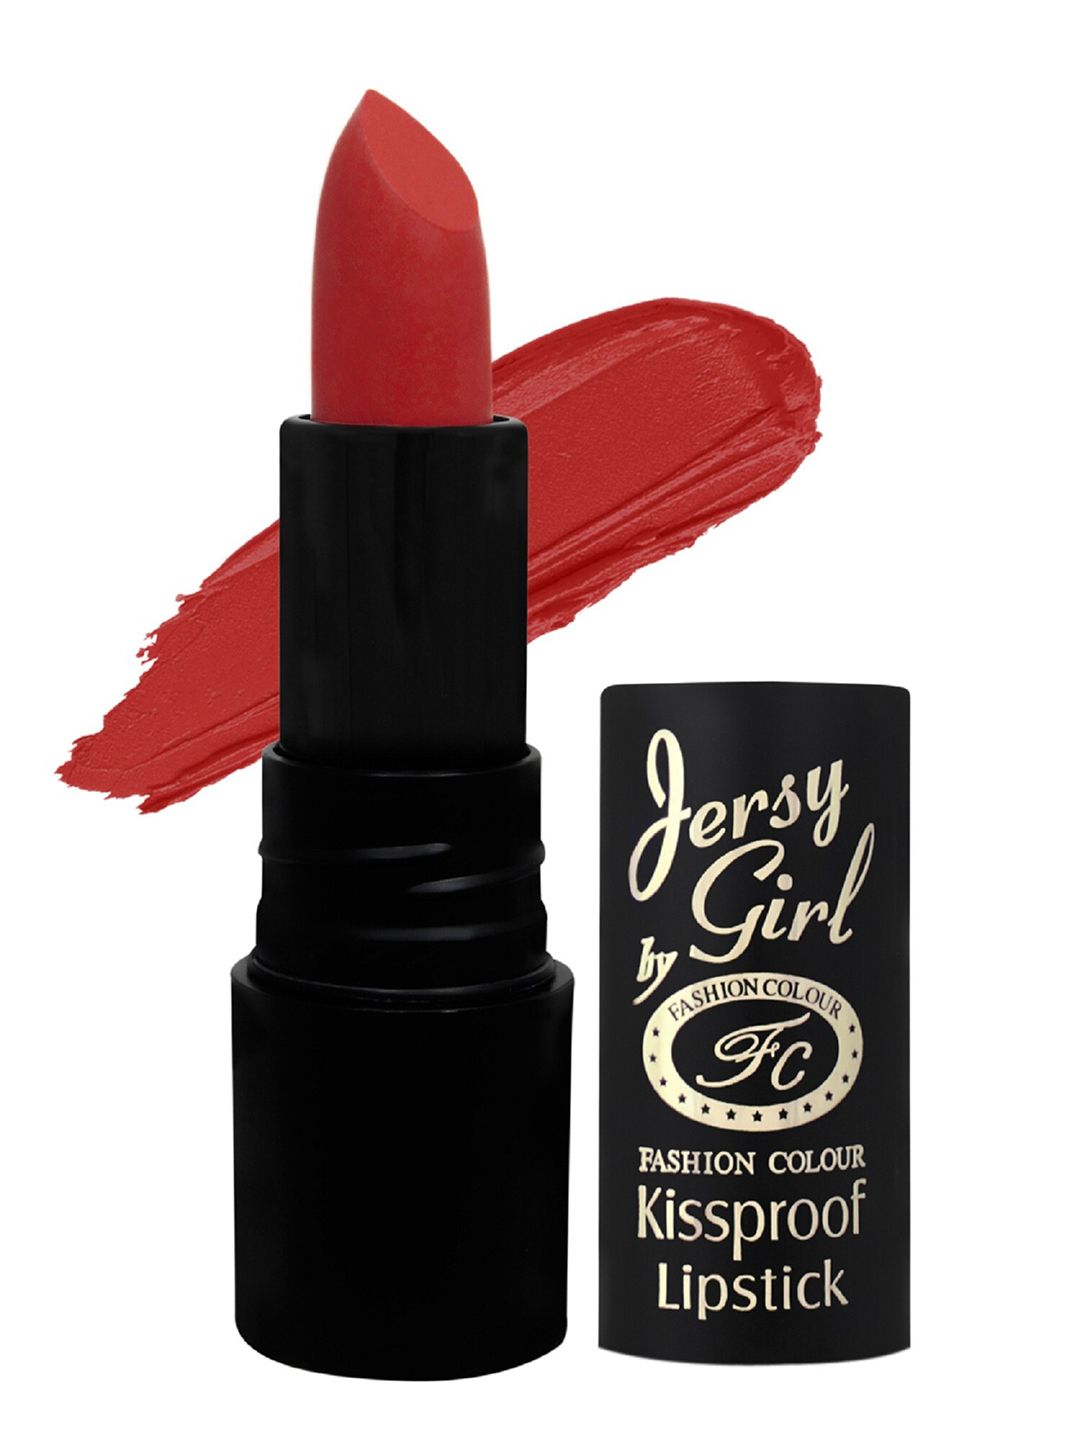 Fashion Colour Jersy Girl Kiss proof Lipstick - Blood 7 3.8 g Price in India